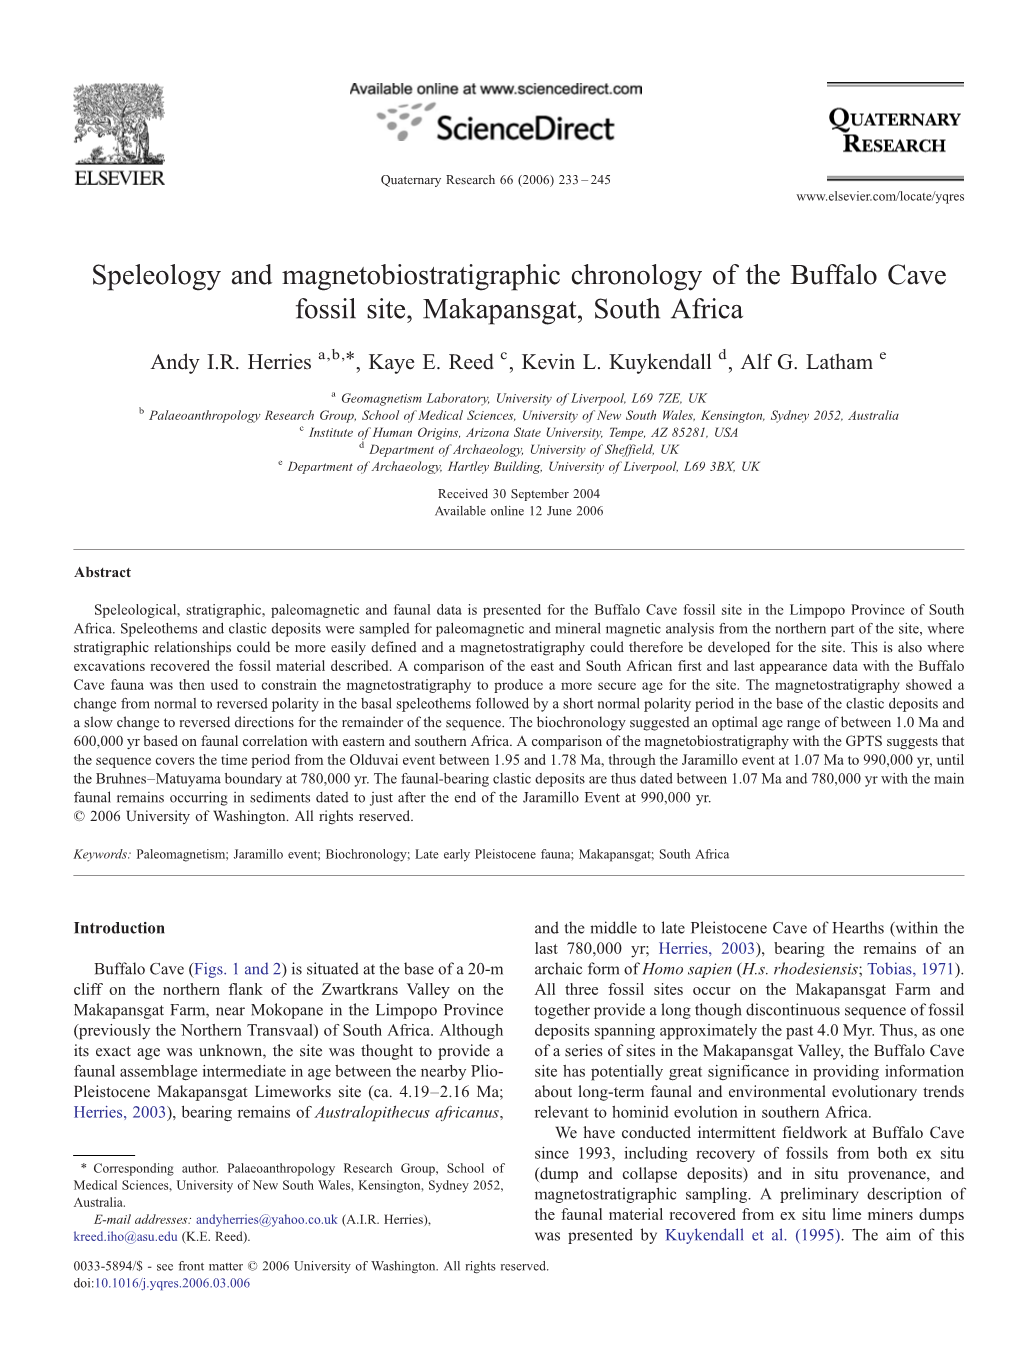 Speleology and Magnetobiostratigraphic Chronology of the Buffalo Cave Fossil Site, Makapansgat, South Africa ⁎ Andy I.R